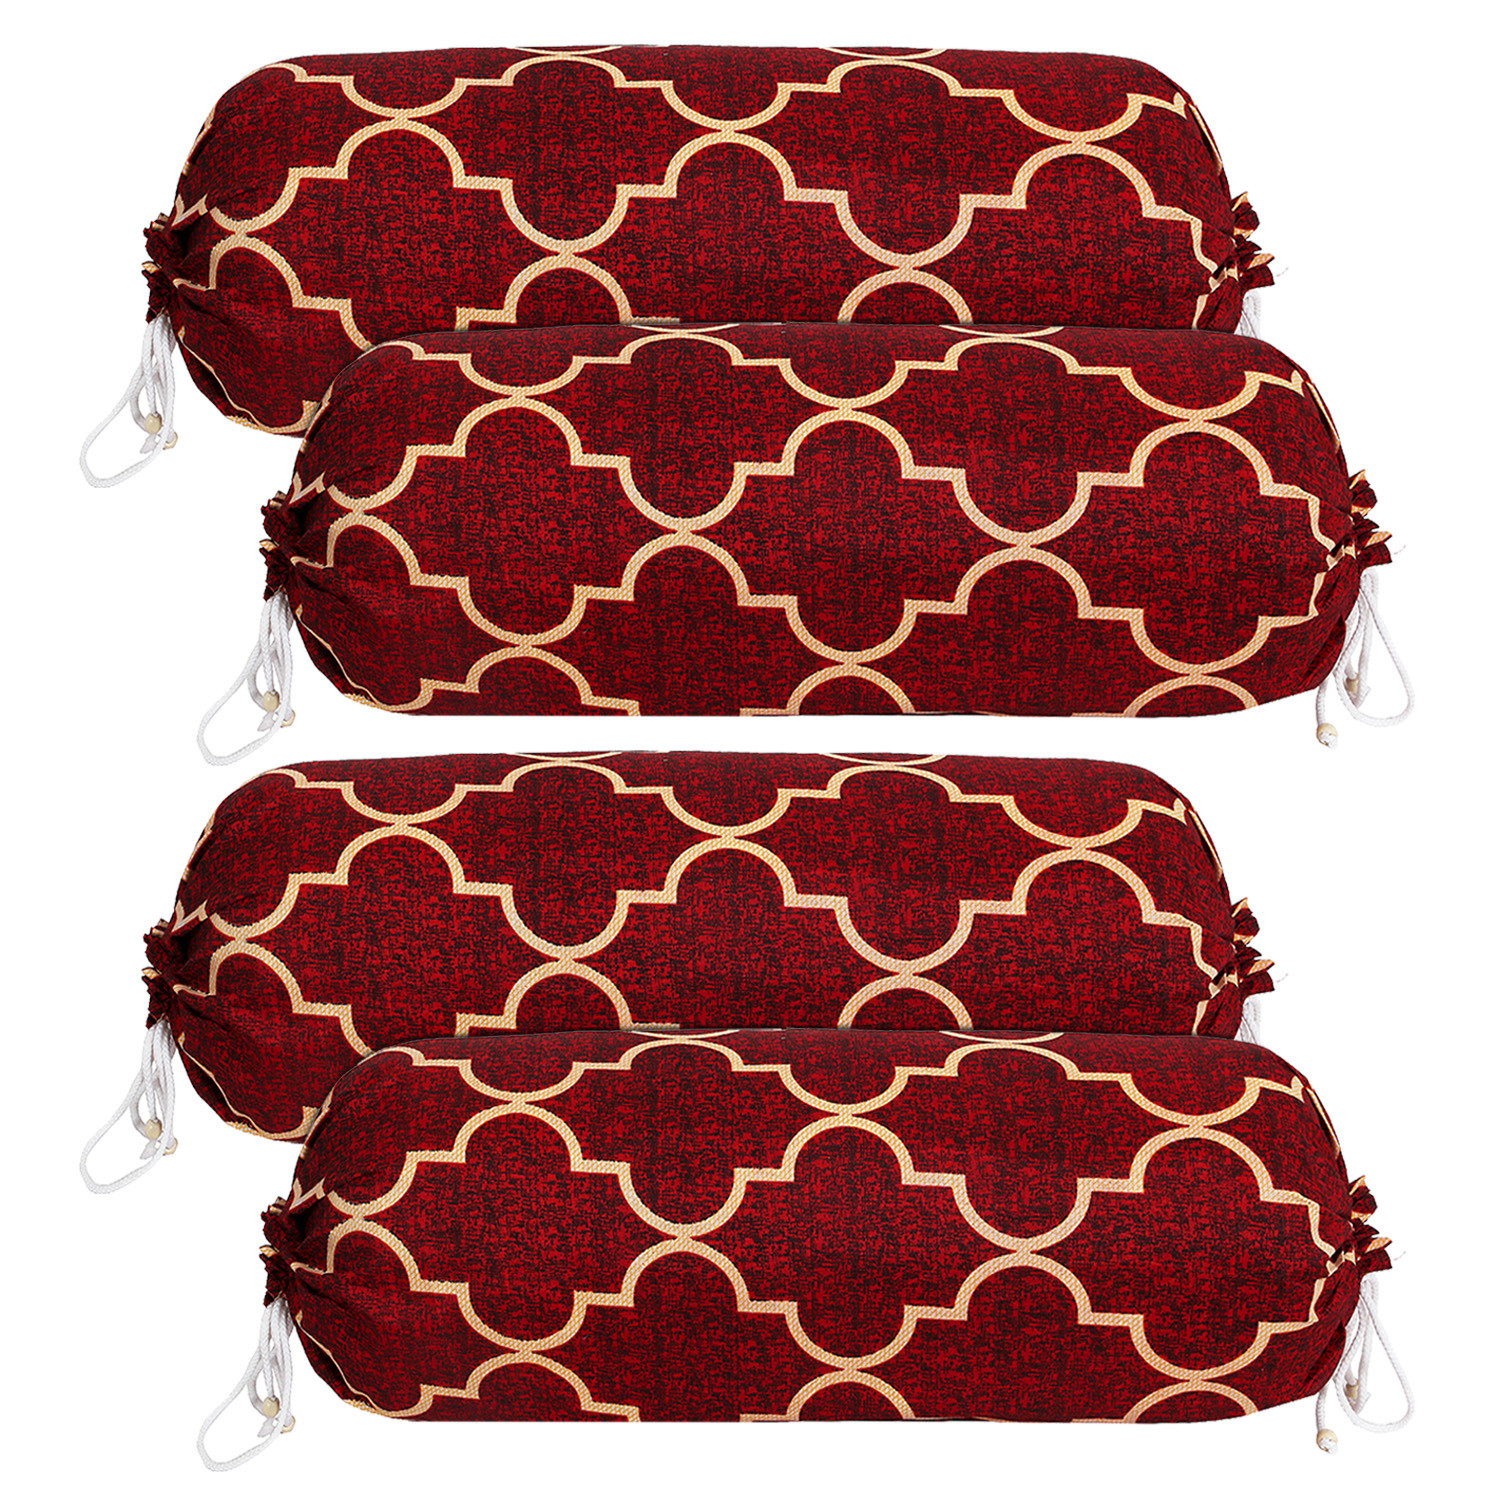 Kuber Industries Bolster Cover|Soft Cotton Bolster Cover Set|Diwan Round Bolster Pillow Covers|Luxurious Lattice Print Roll Masand Cover|16x32 Inch (Red)